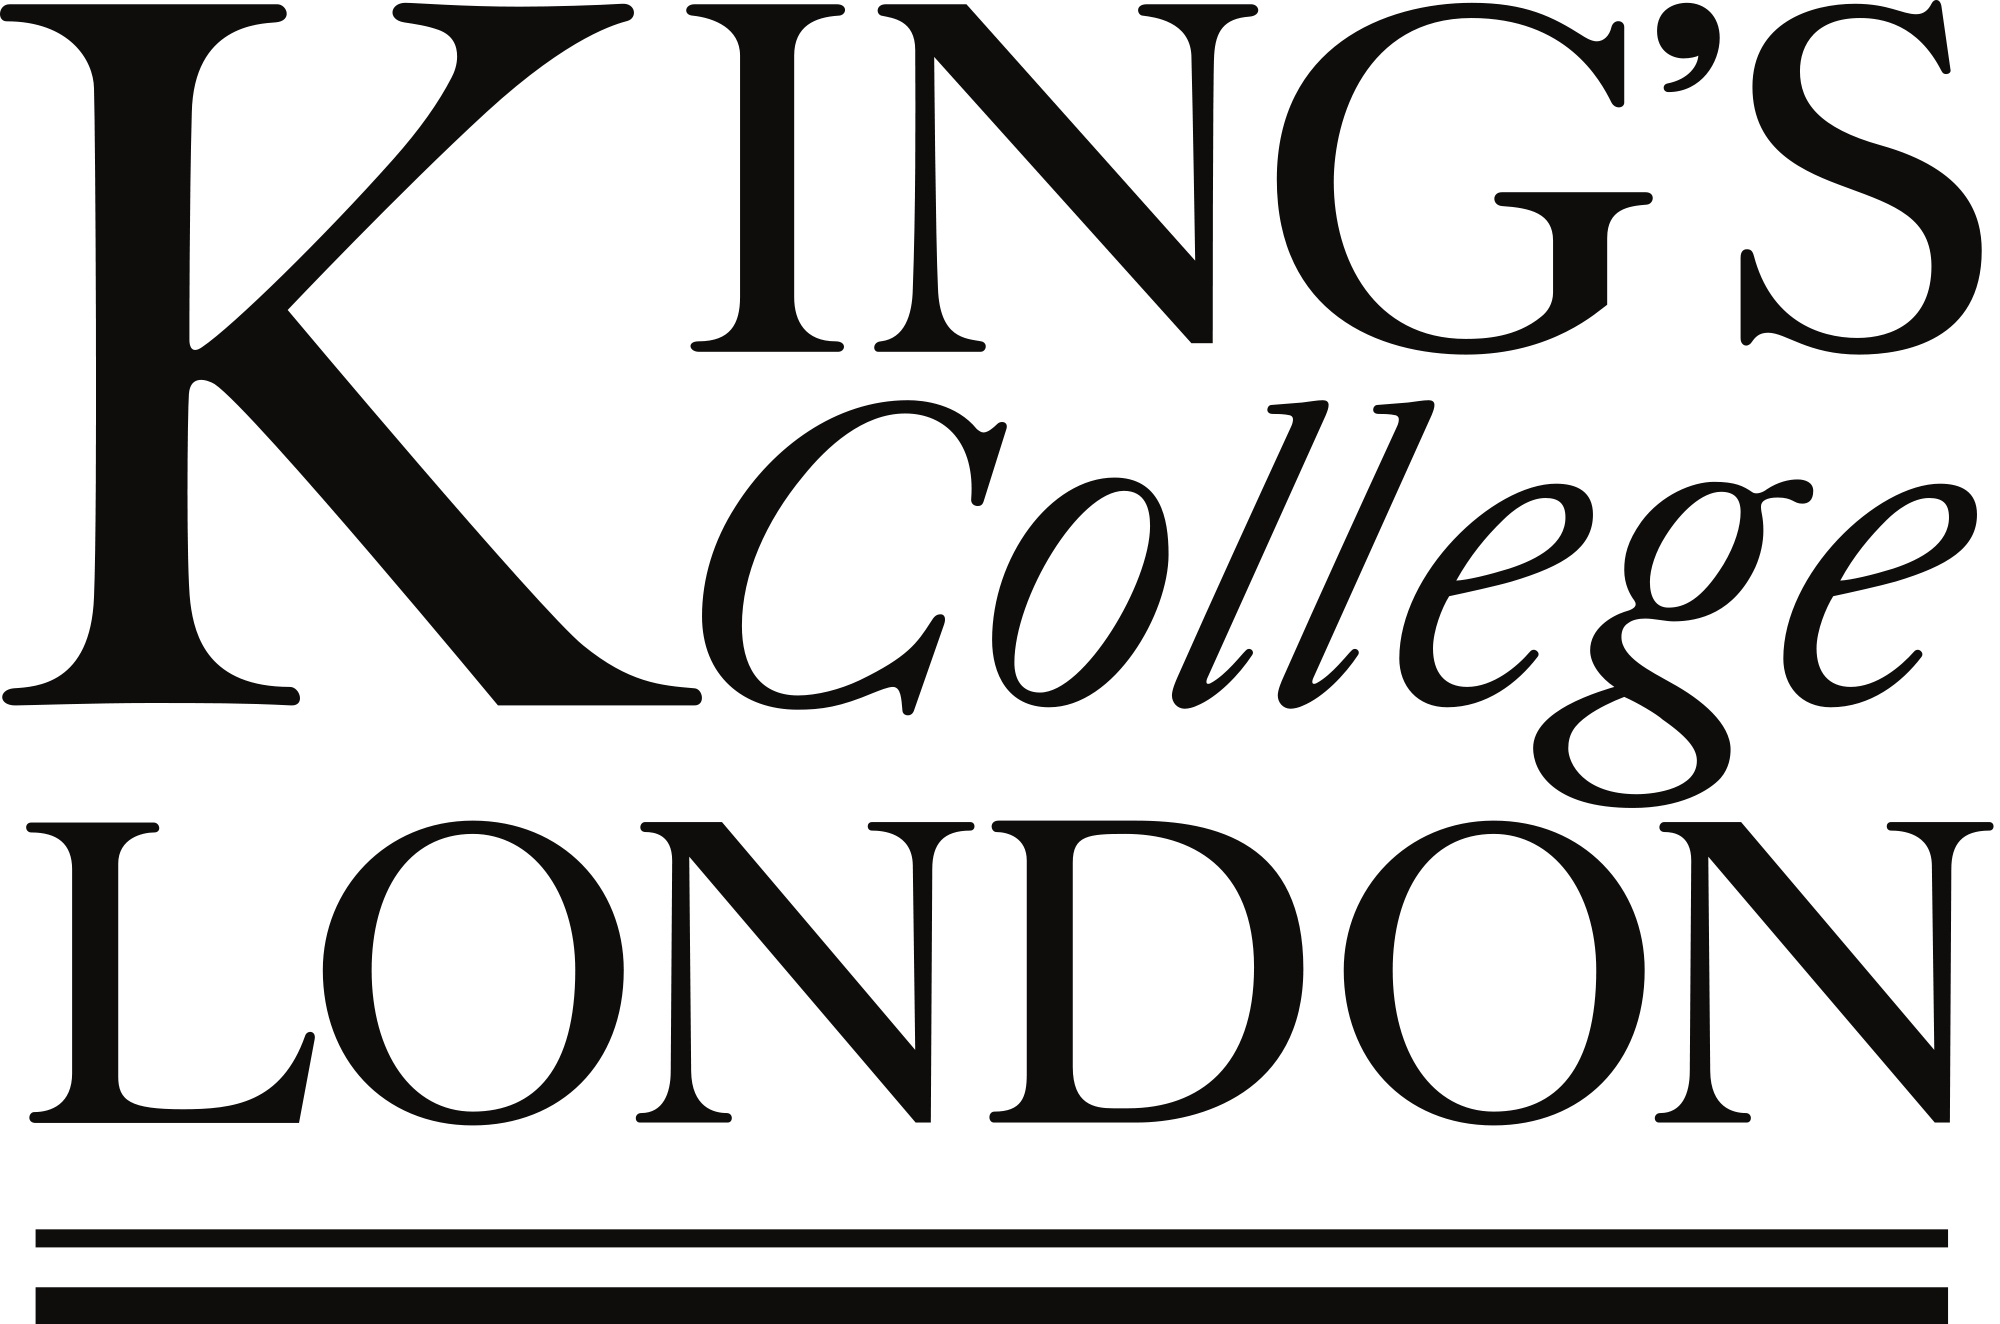 King's College Logo - File:Kcl-logo.svg - Wikimedia Commons